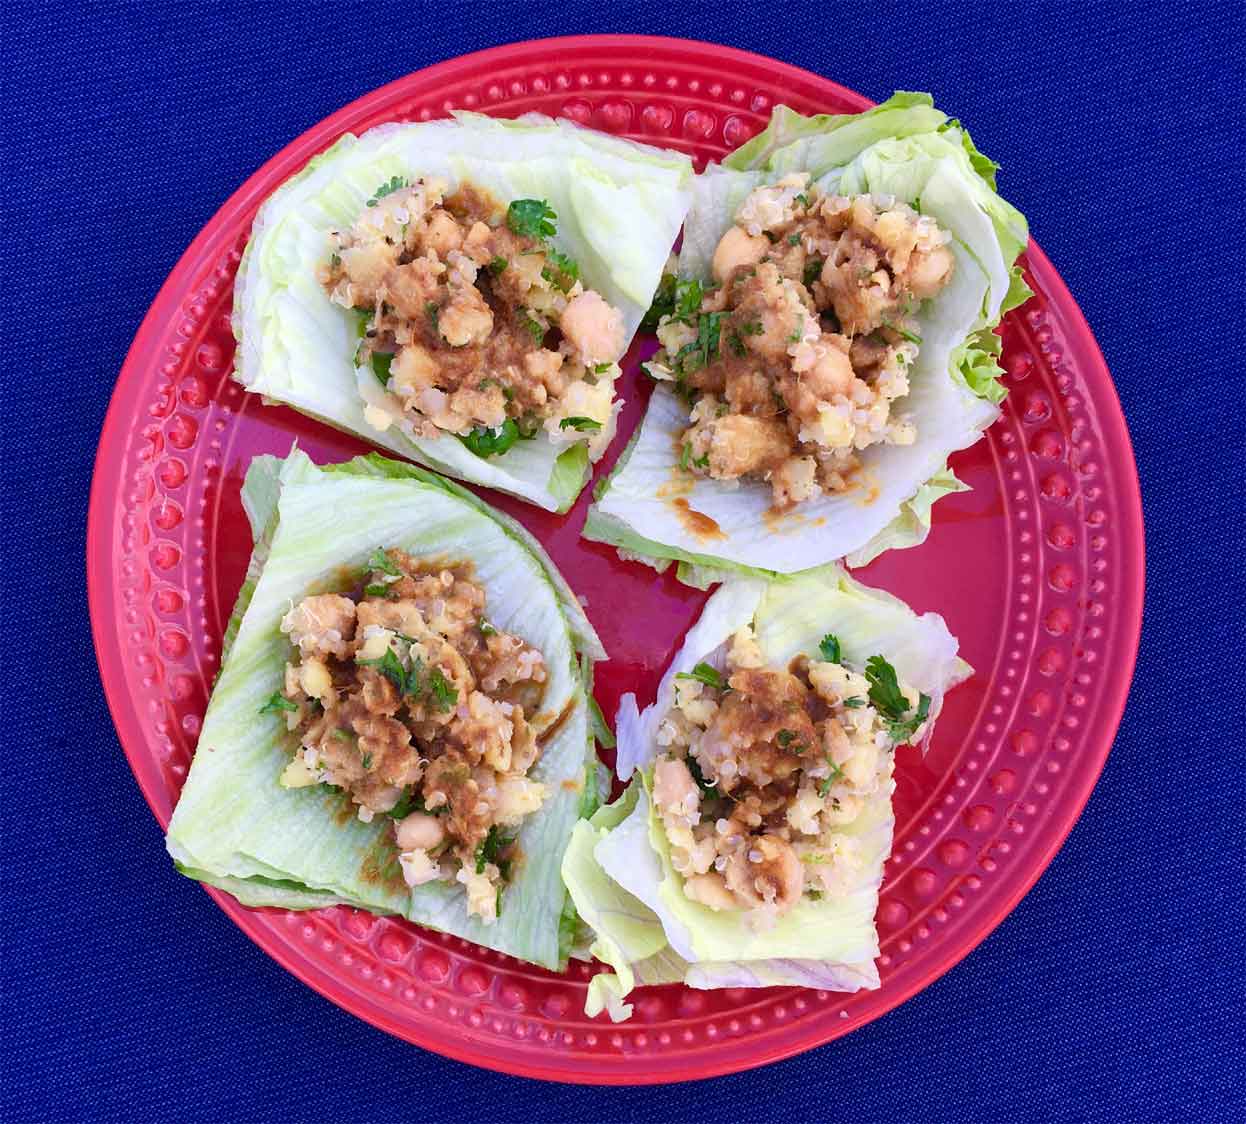 Savory Chickpea Quinoa Lettuce Wrap with Asian Ginger Dip